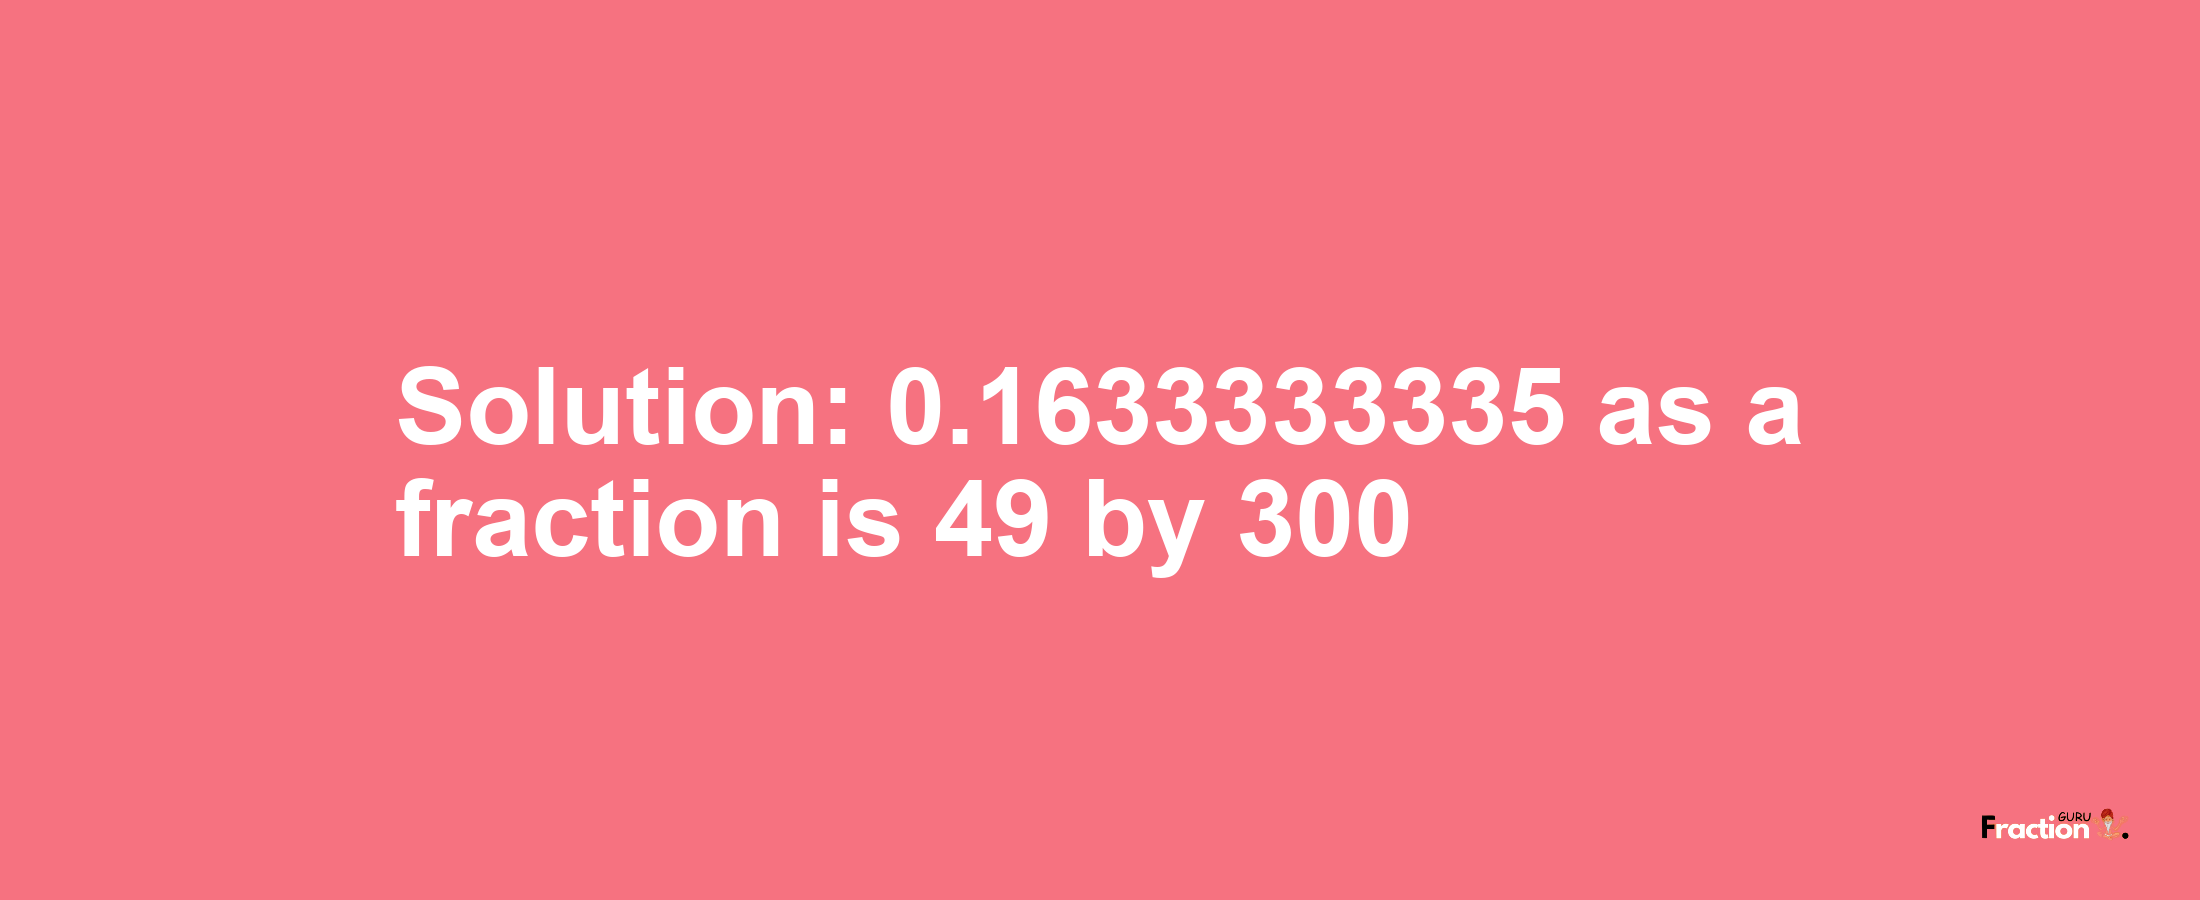 Solution:0.1633333335 as a fraction is 49/300